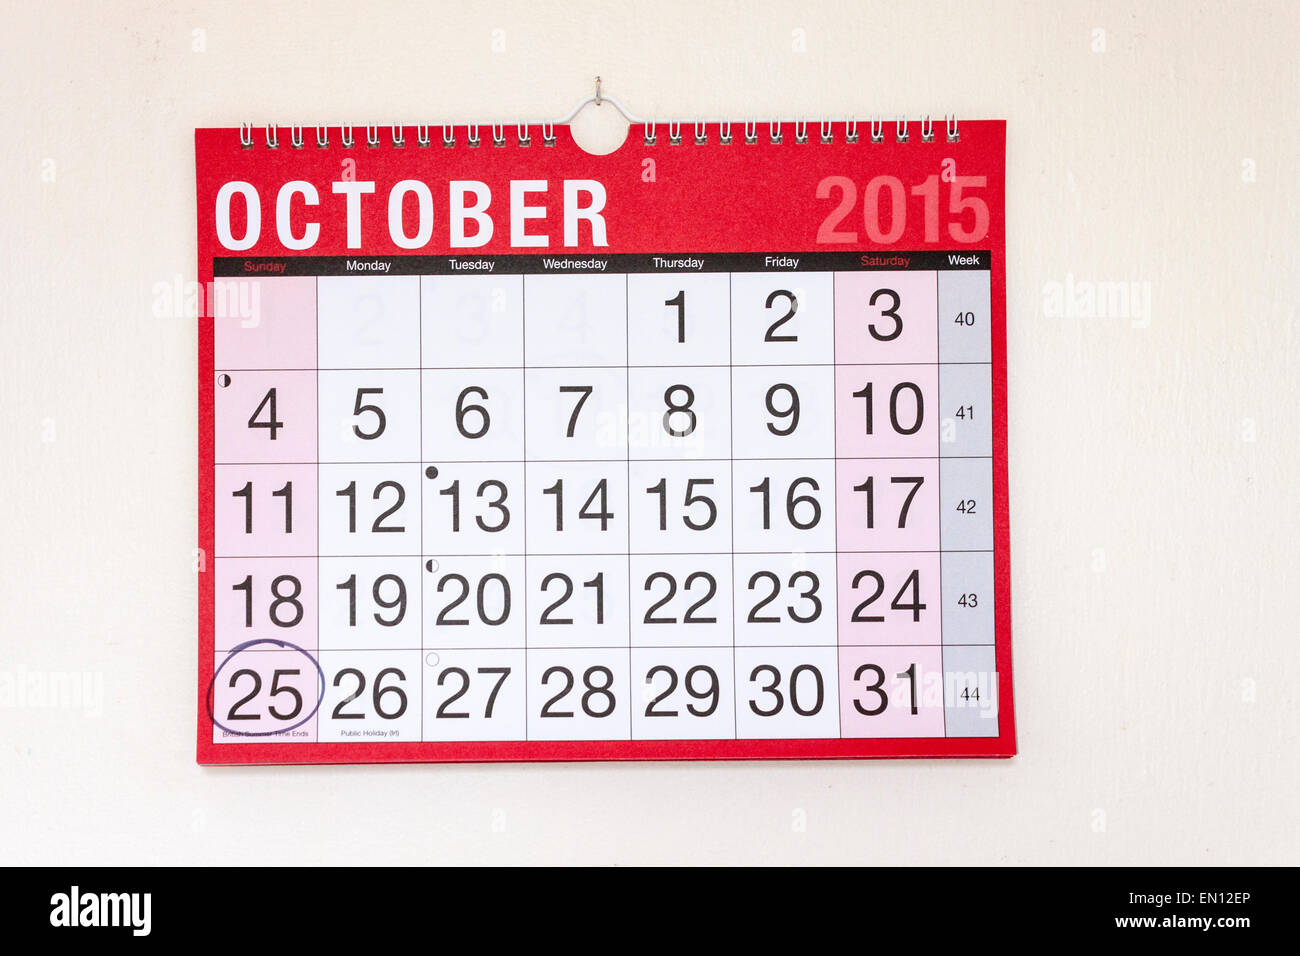 Monthly wall calendar October 2015, date British Summer Time ends circled. Stock Photo